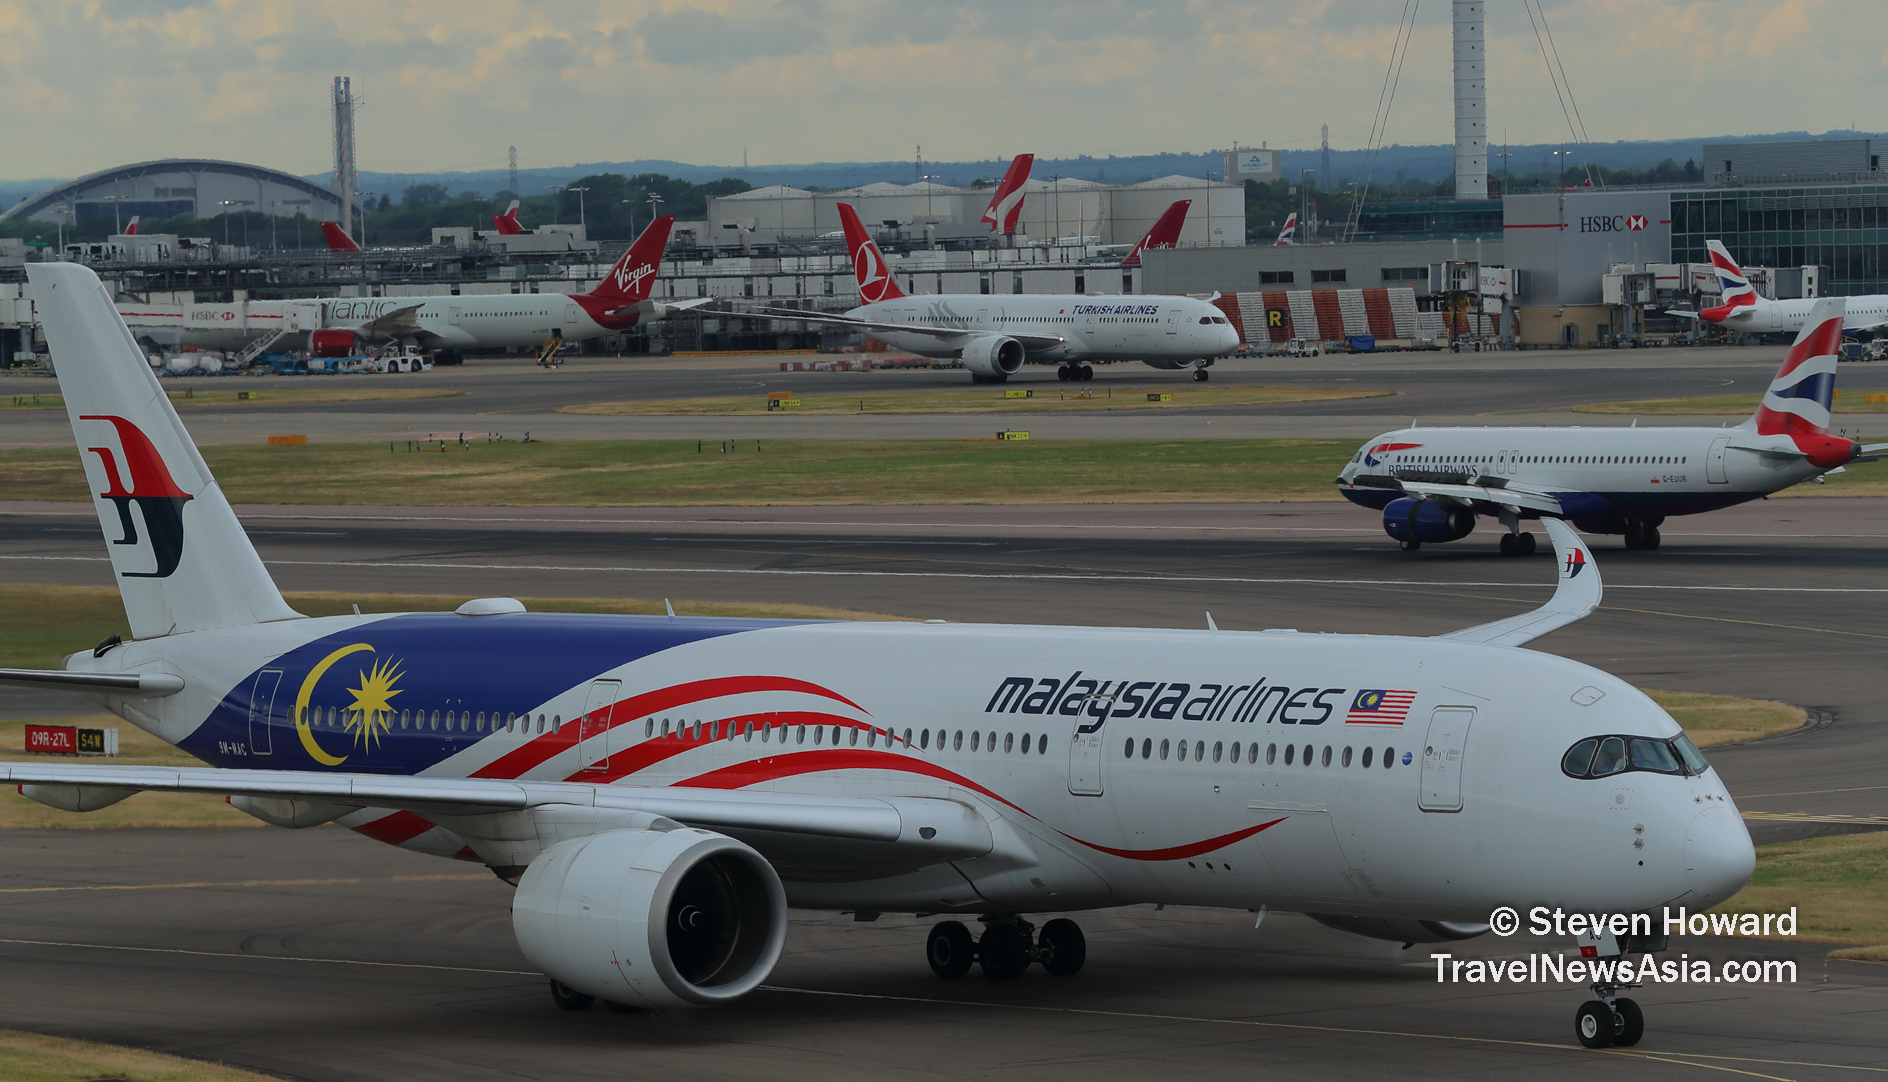 Malaysia Airlines A350 reg: 9M-MAC at LHR in June 2023. Picture by Steven Howard of TravelNewsAsia.com Click to enlarge.